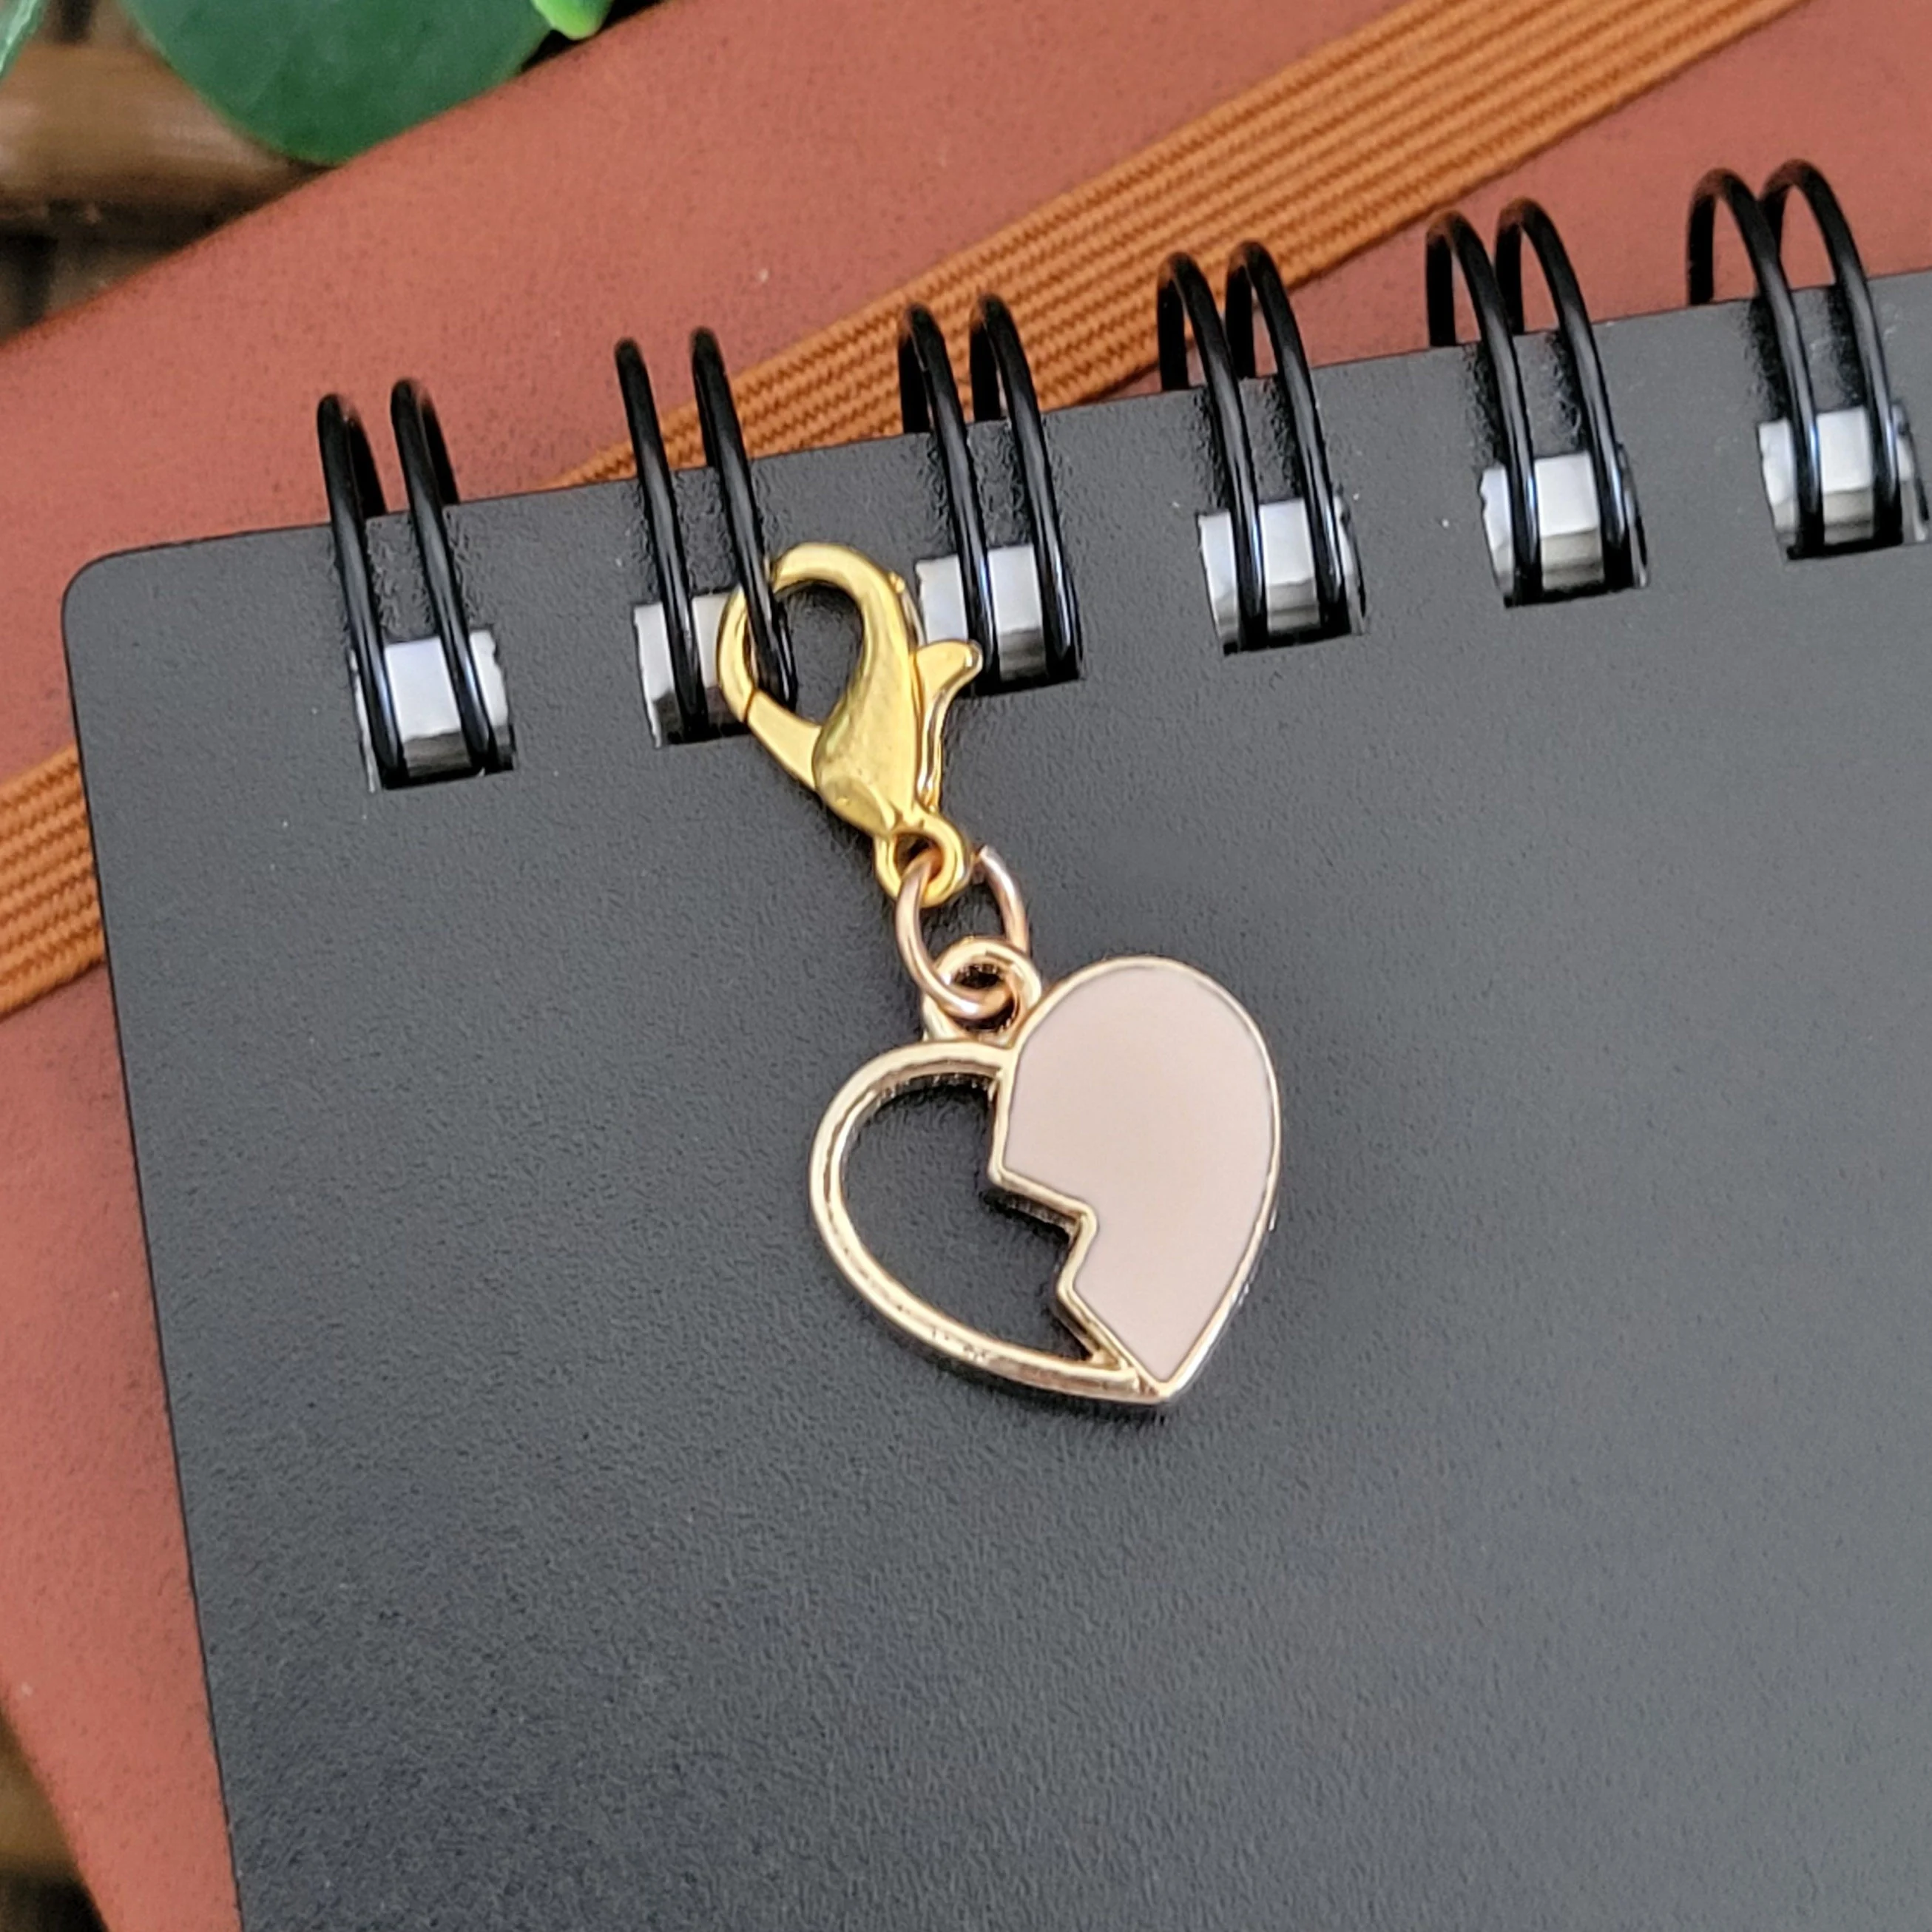 a heart shaped keychain on a spiral notebook